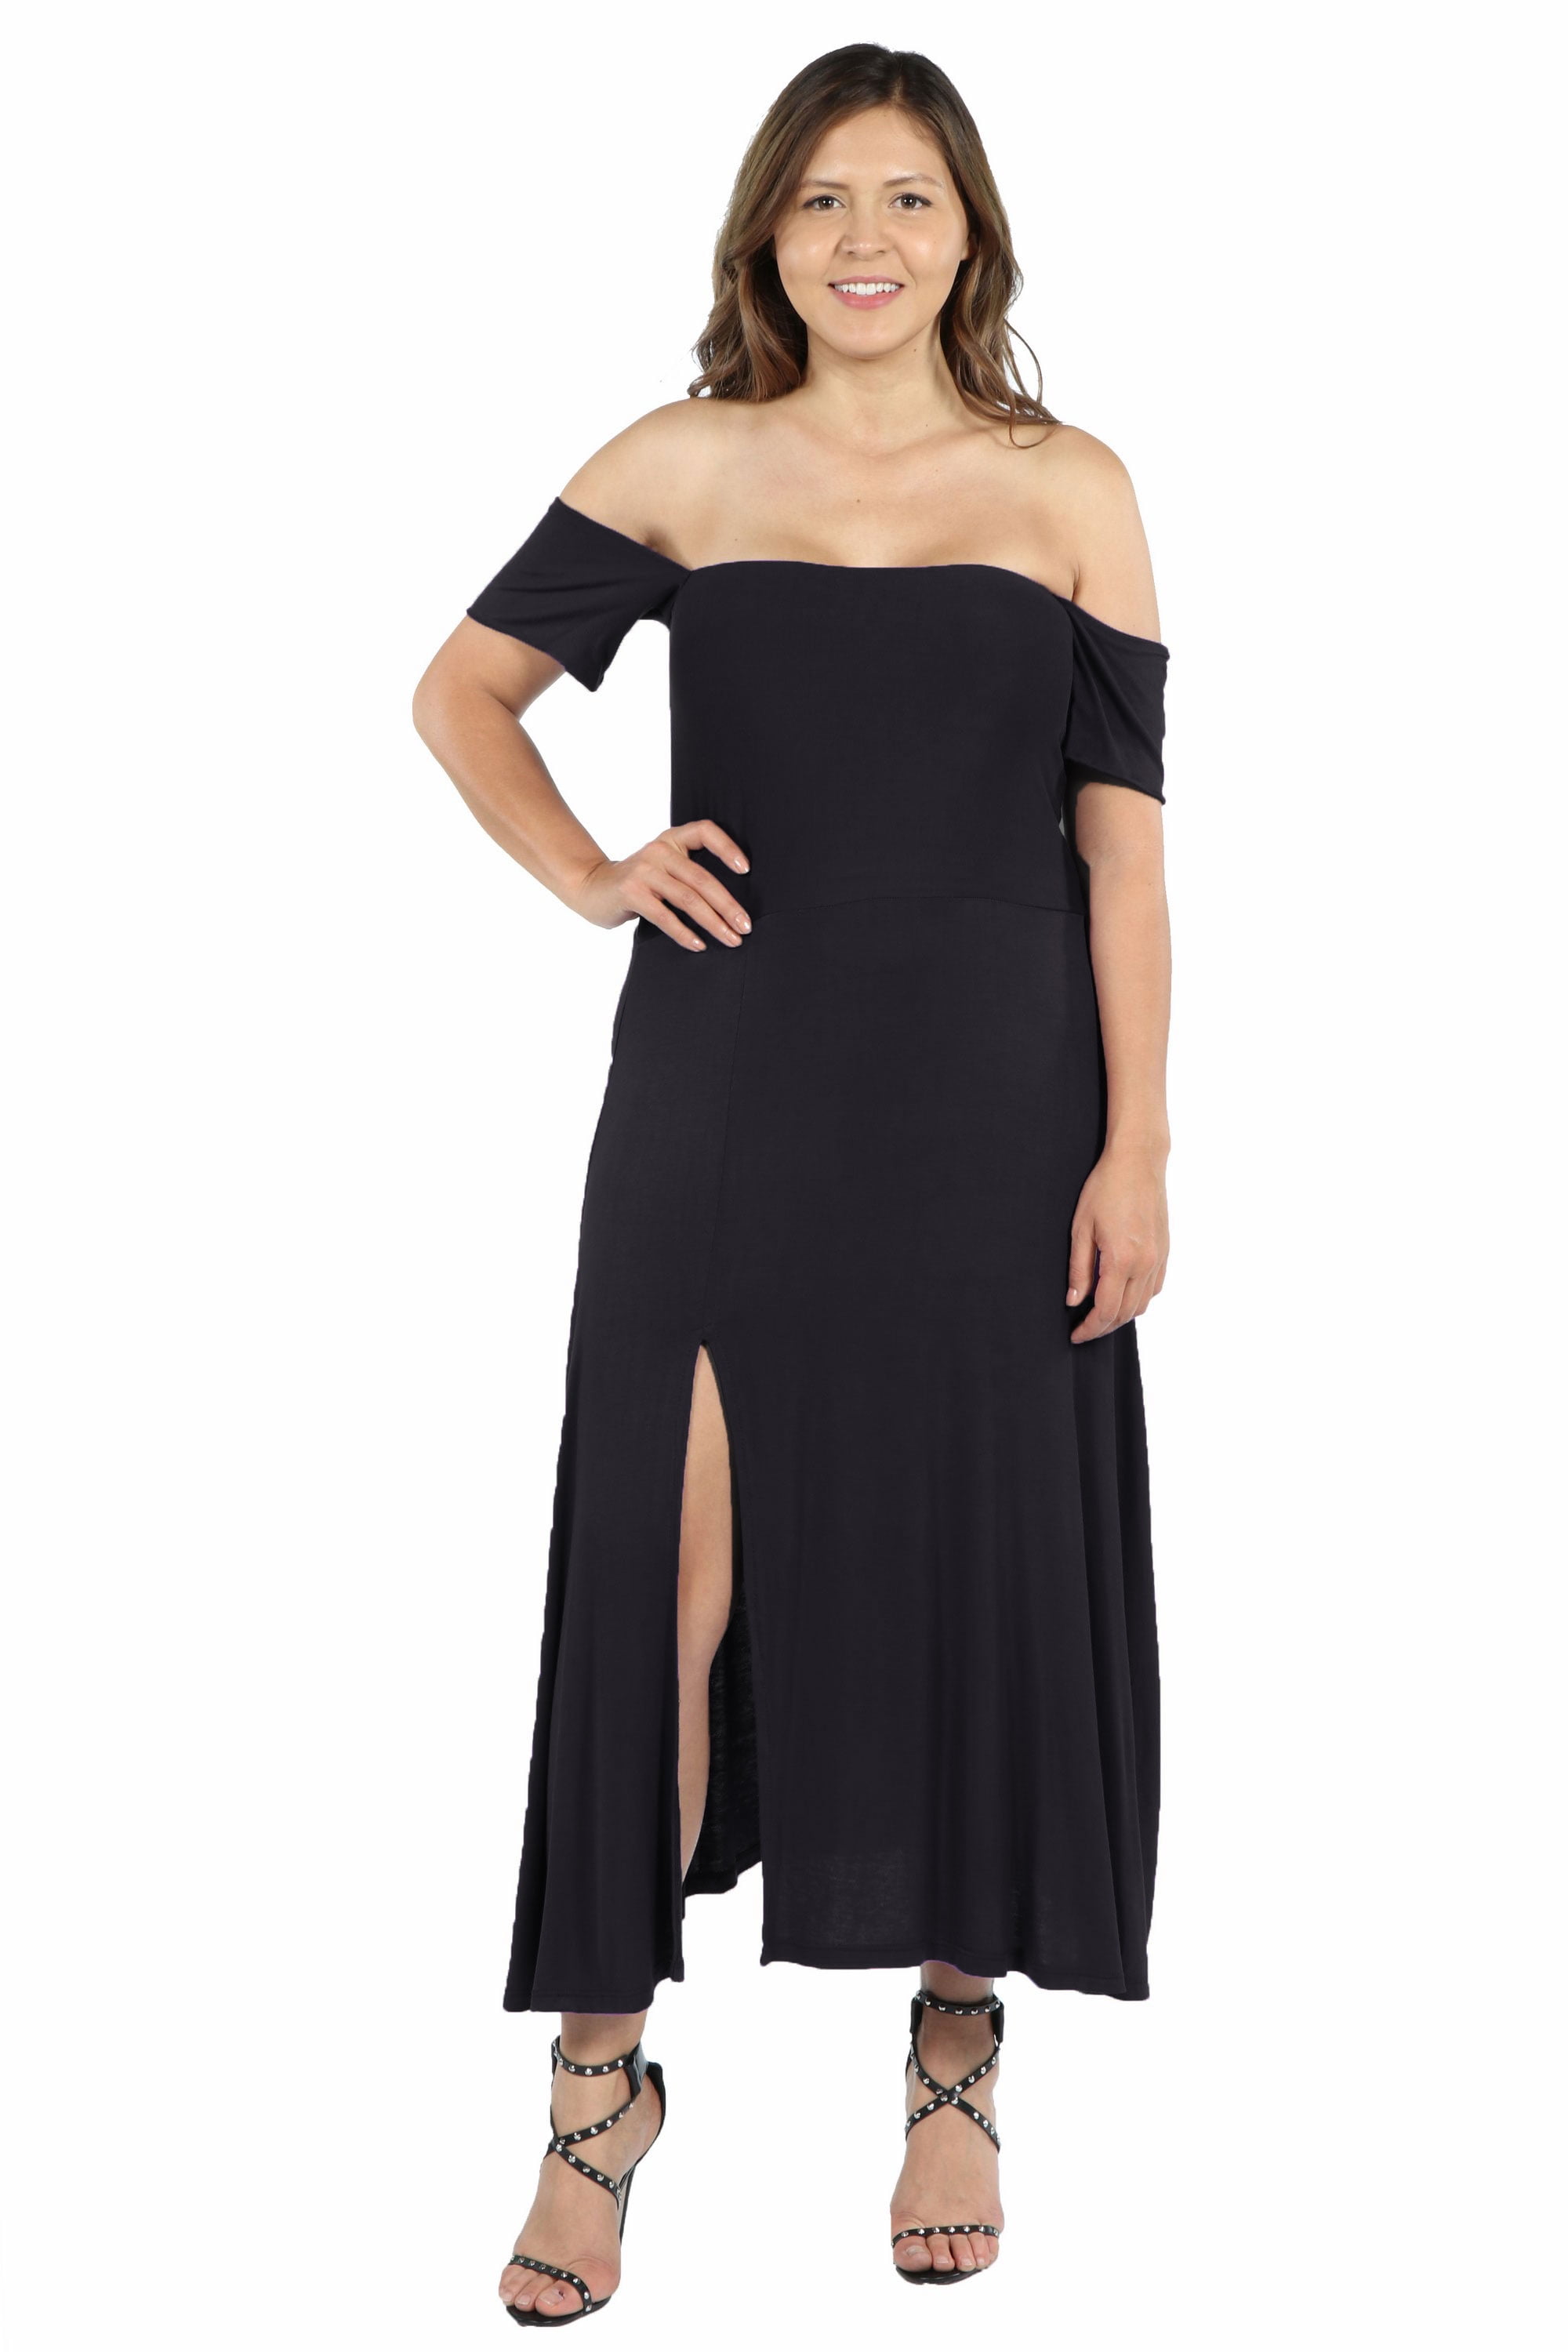 24/7 Comfort Apparel - Women’s Plus Size Off The Shoulder Dress with ...